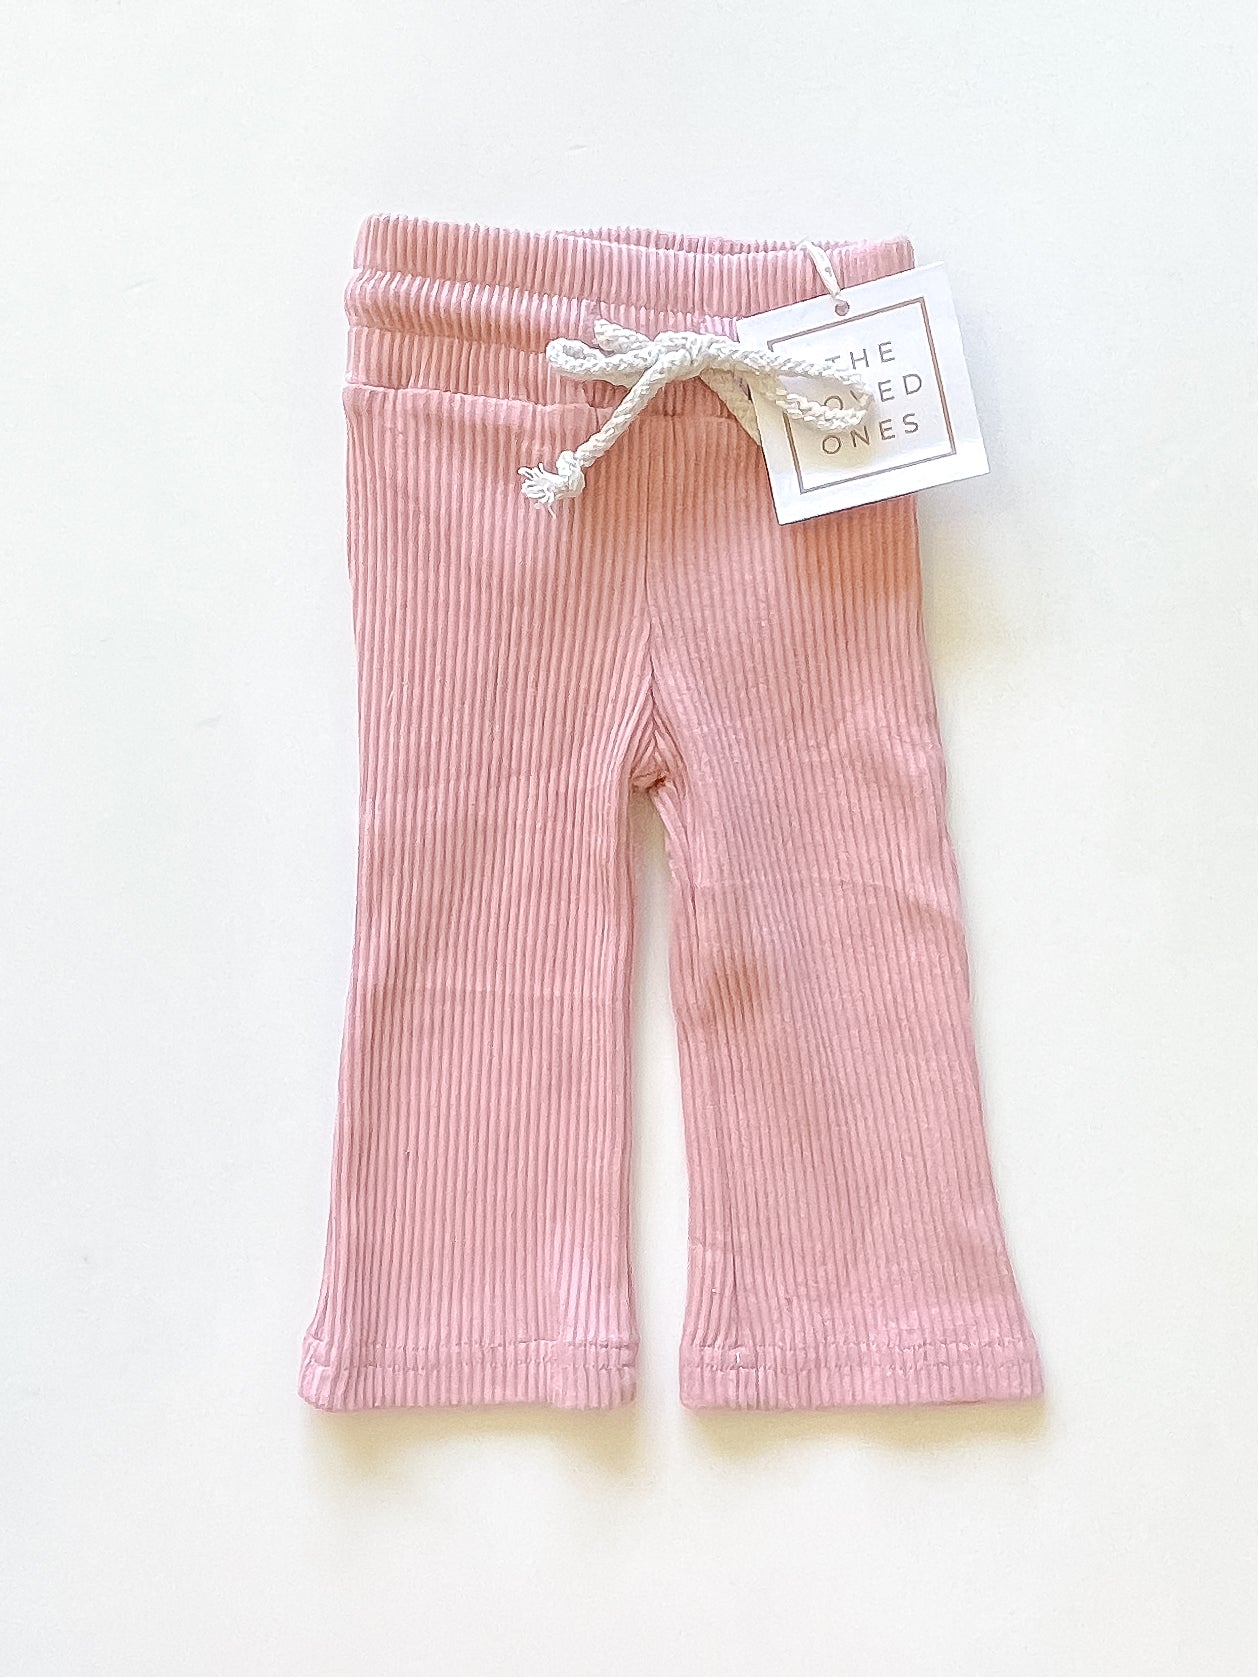 BNWT The Loved Ones ribbed drawstring pants (0-3m)